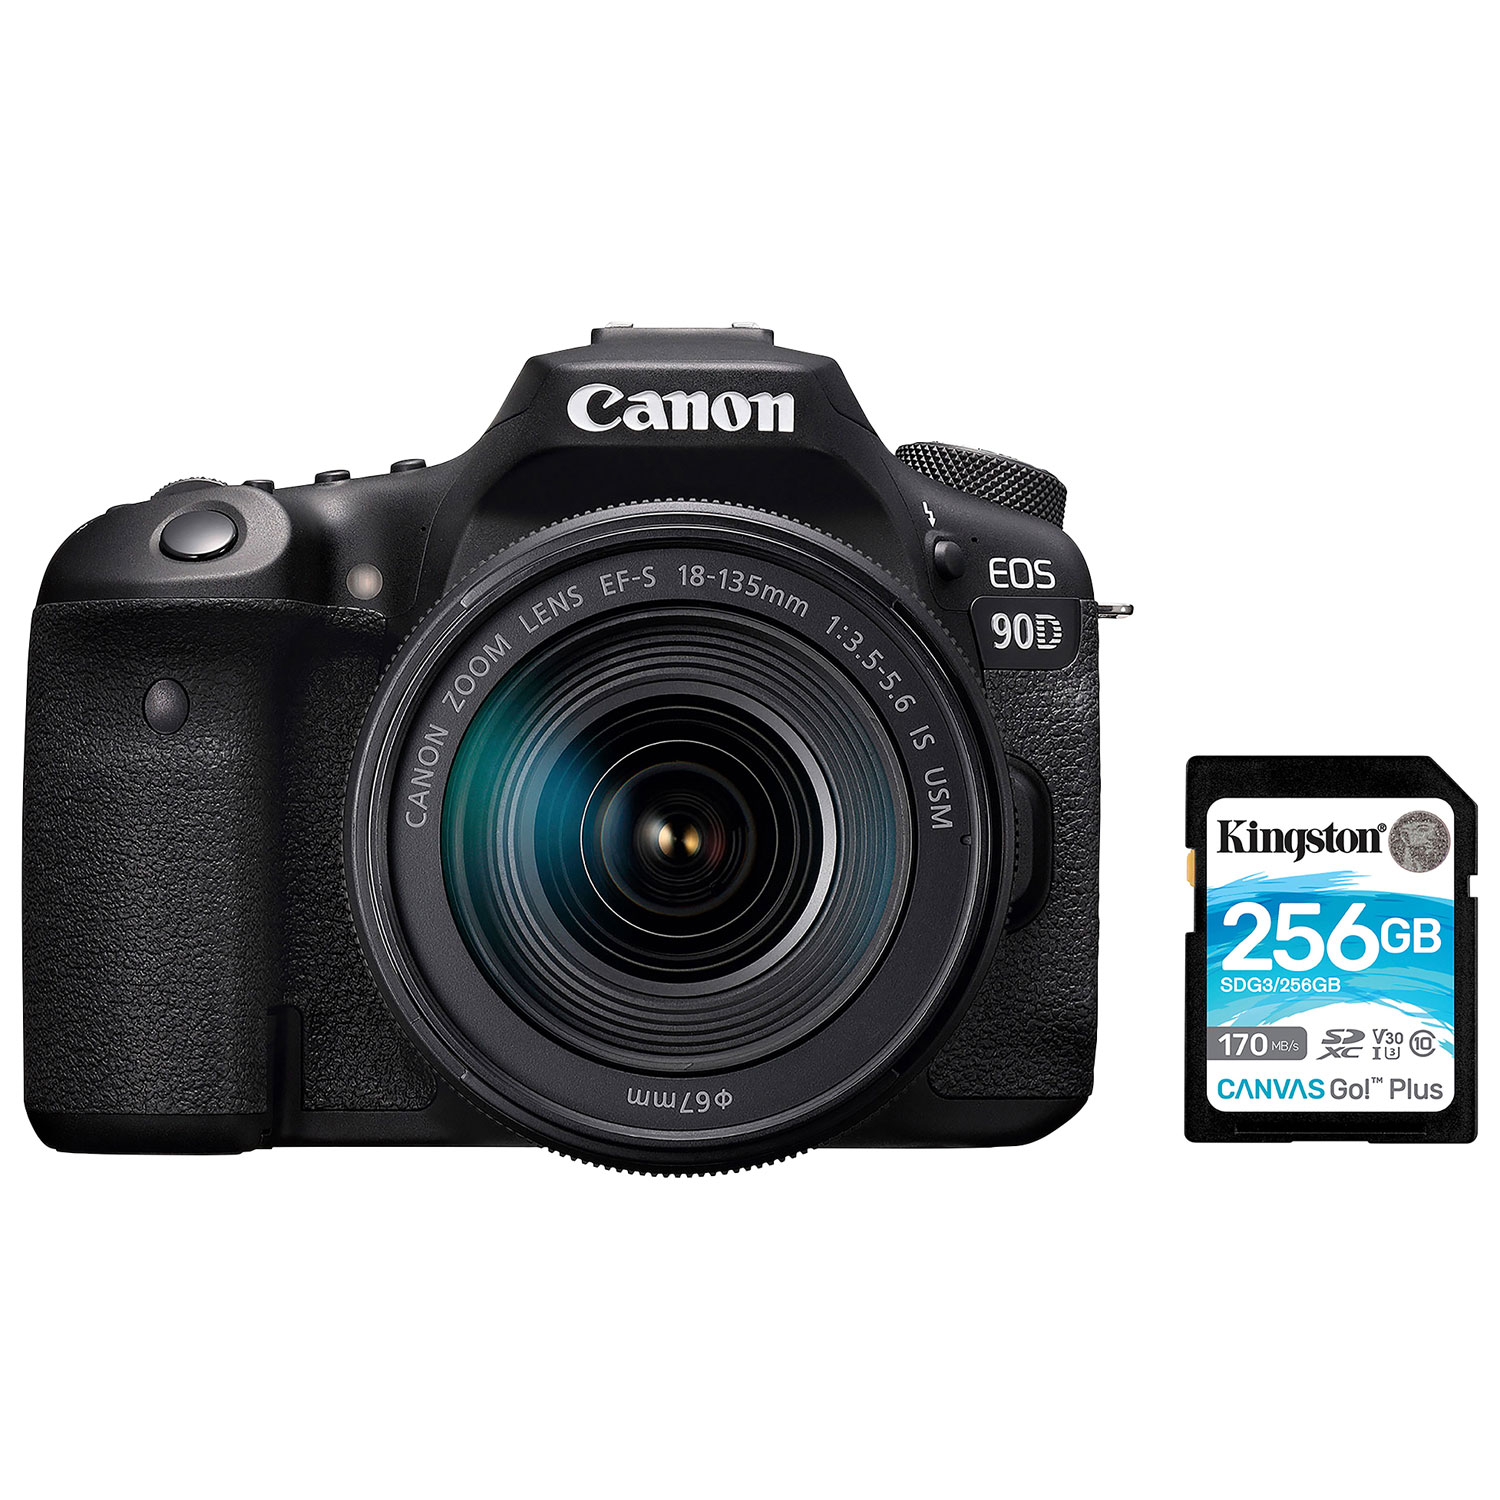 Canon EOS 90D DSLR Camera with 18-135mm IS USM Lens Kit & 256GB Memory Card